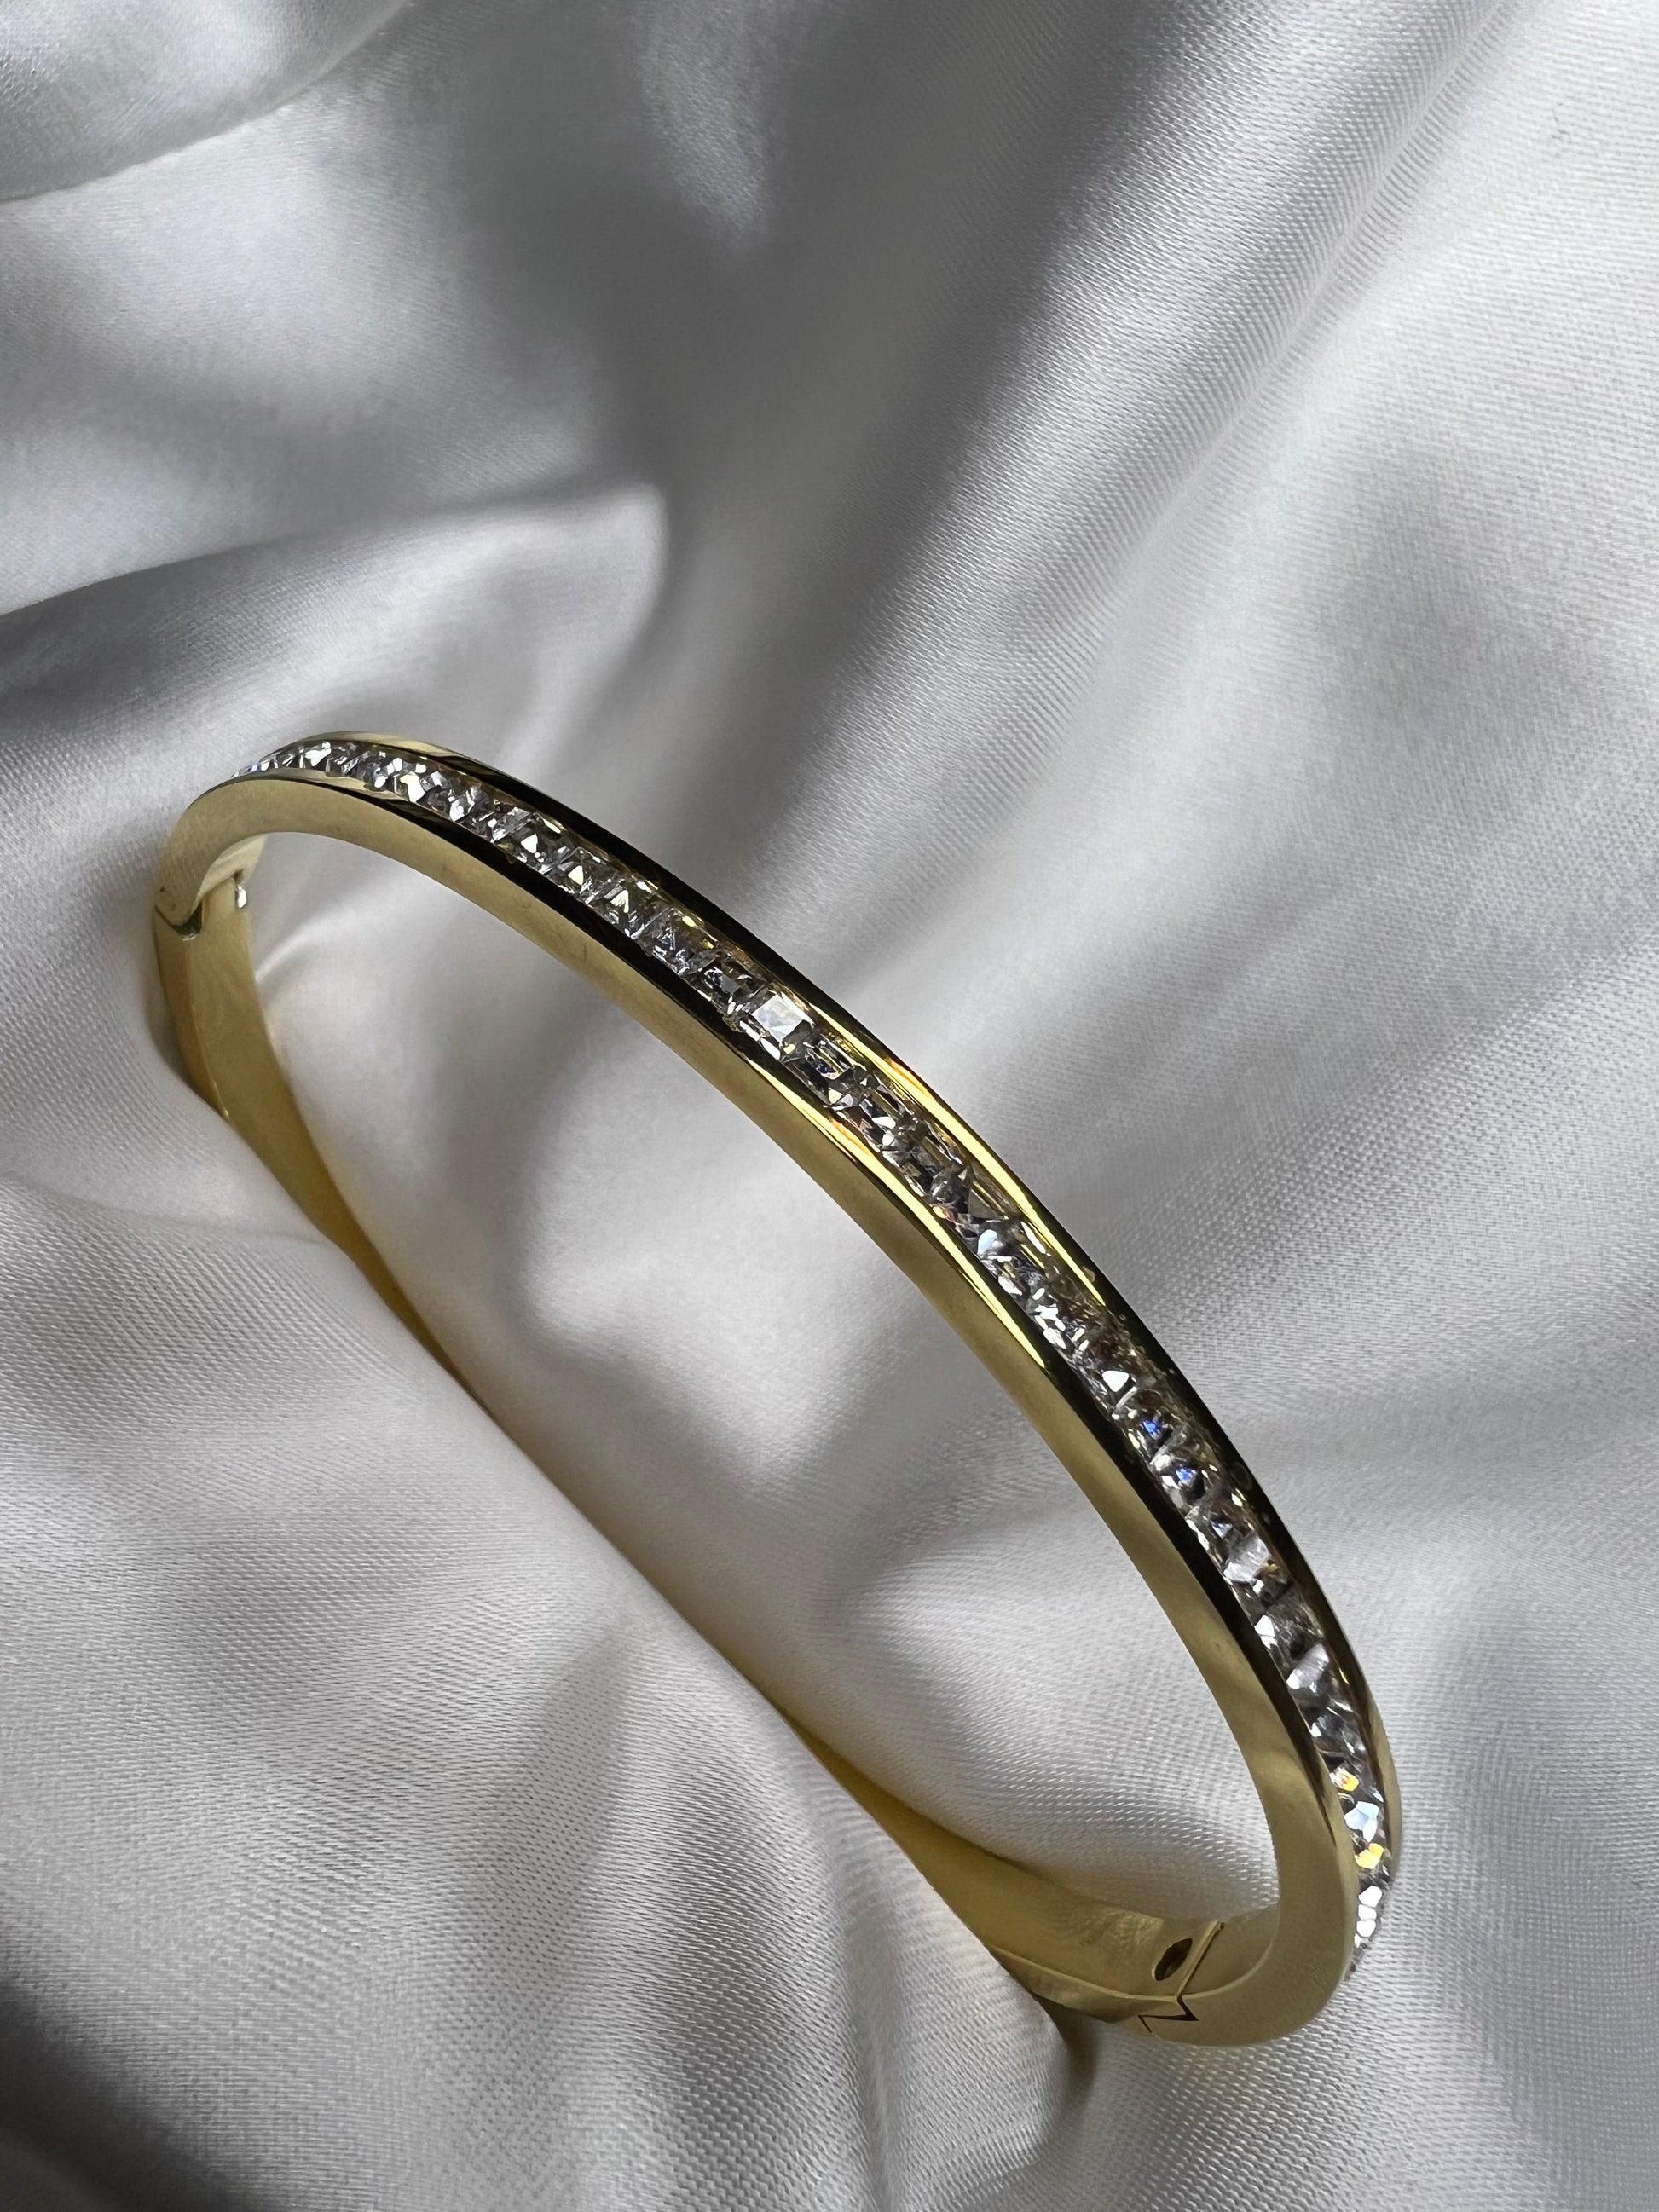 18K gold plated, stainless steel solid bracelet, with small square white cubic zirconia stones 